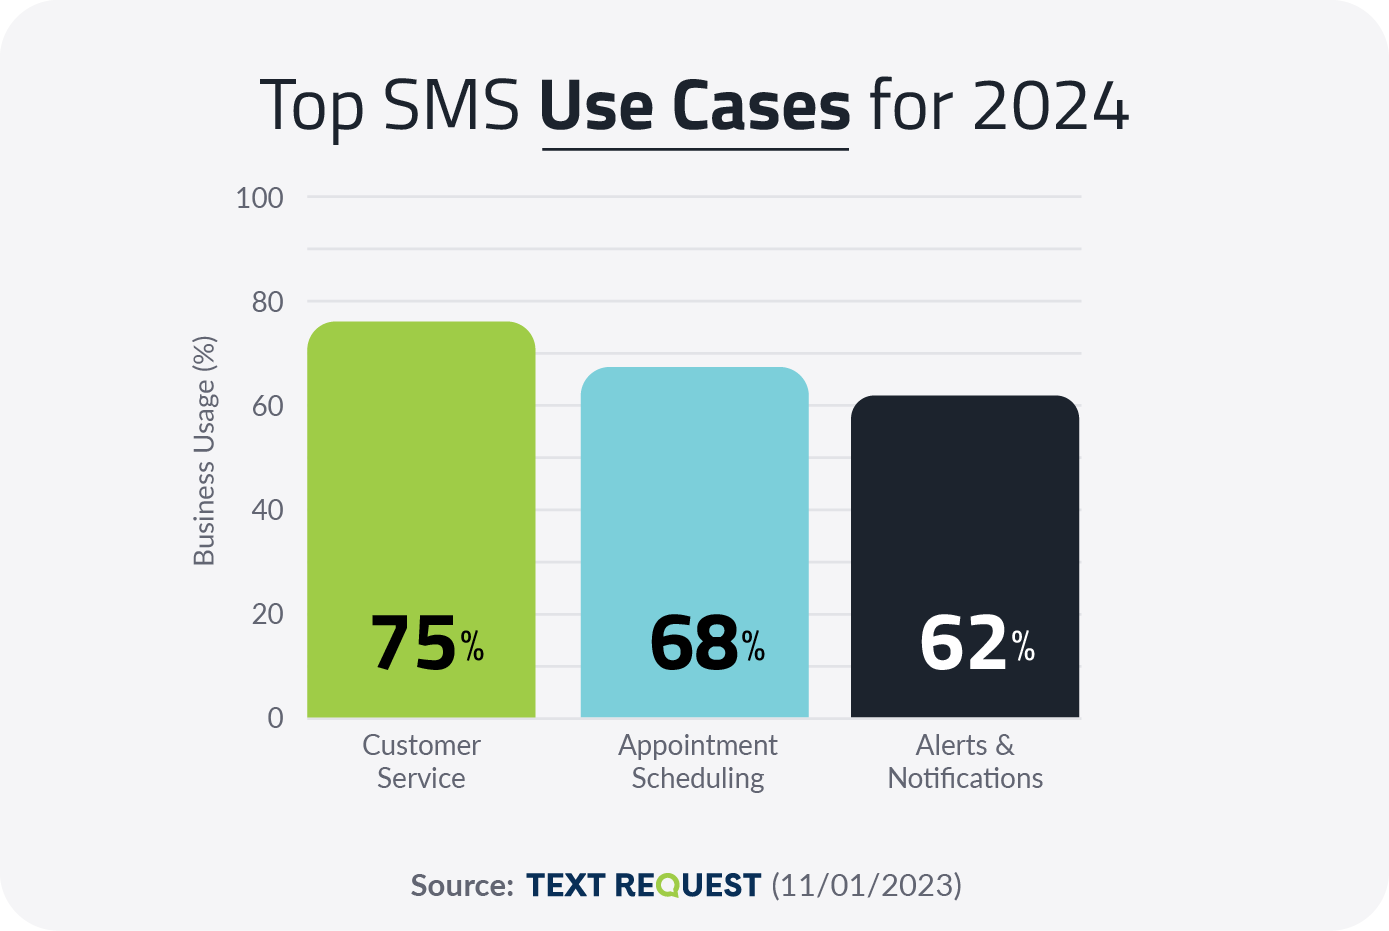 Top SMS Use Cases for 2024